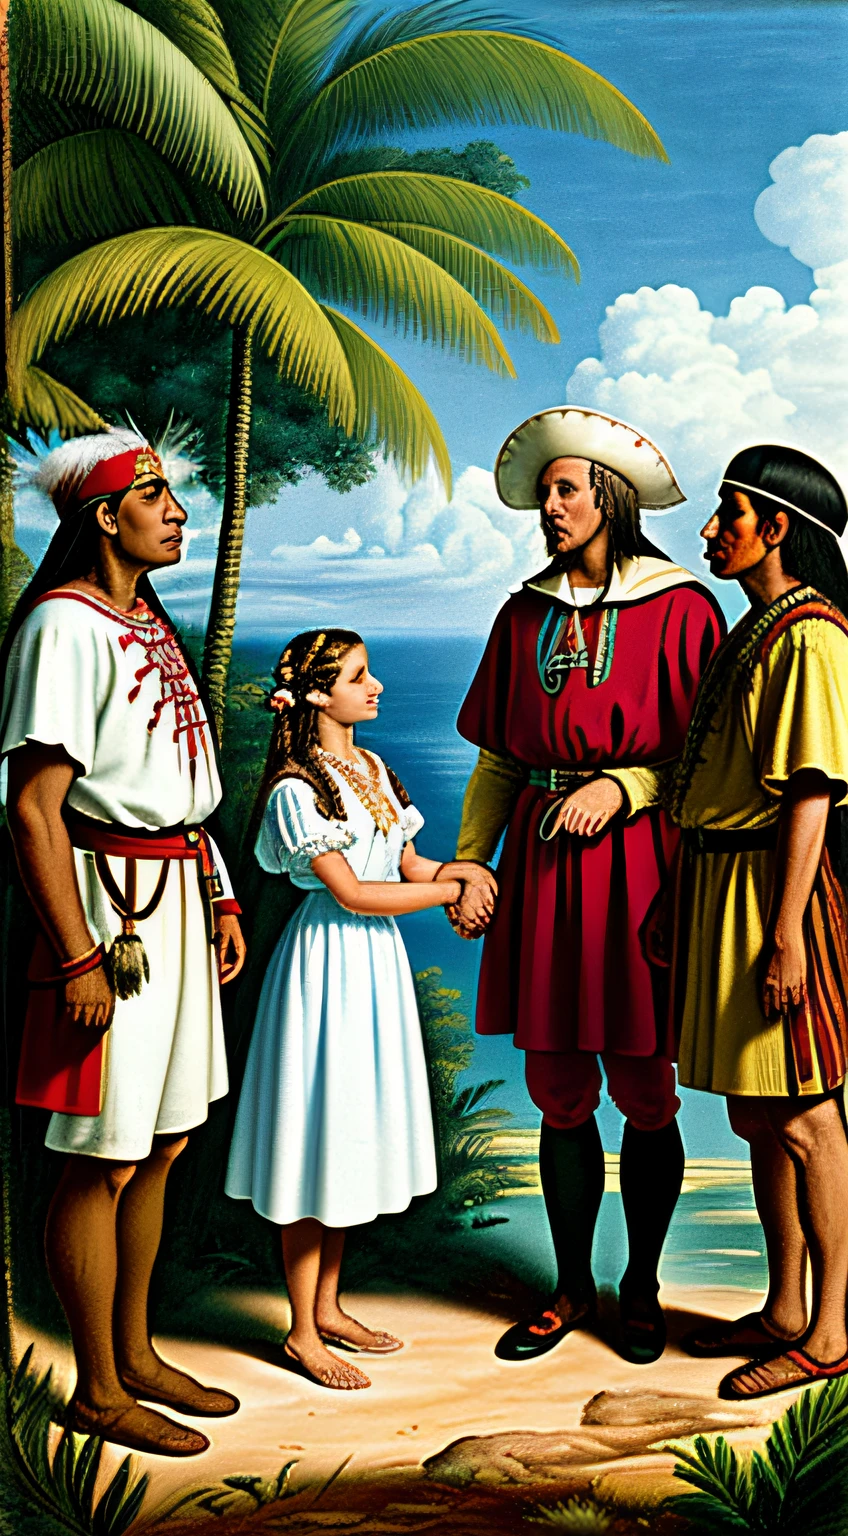 Historical scene of Christopher Columbus in explorer attire, meeting Native Americans dressed in traditional clothing, in a lush Caribbean landscape, mutual curiosity and respect, photorealistic style.